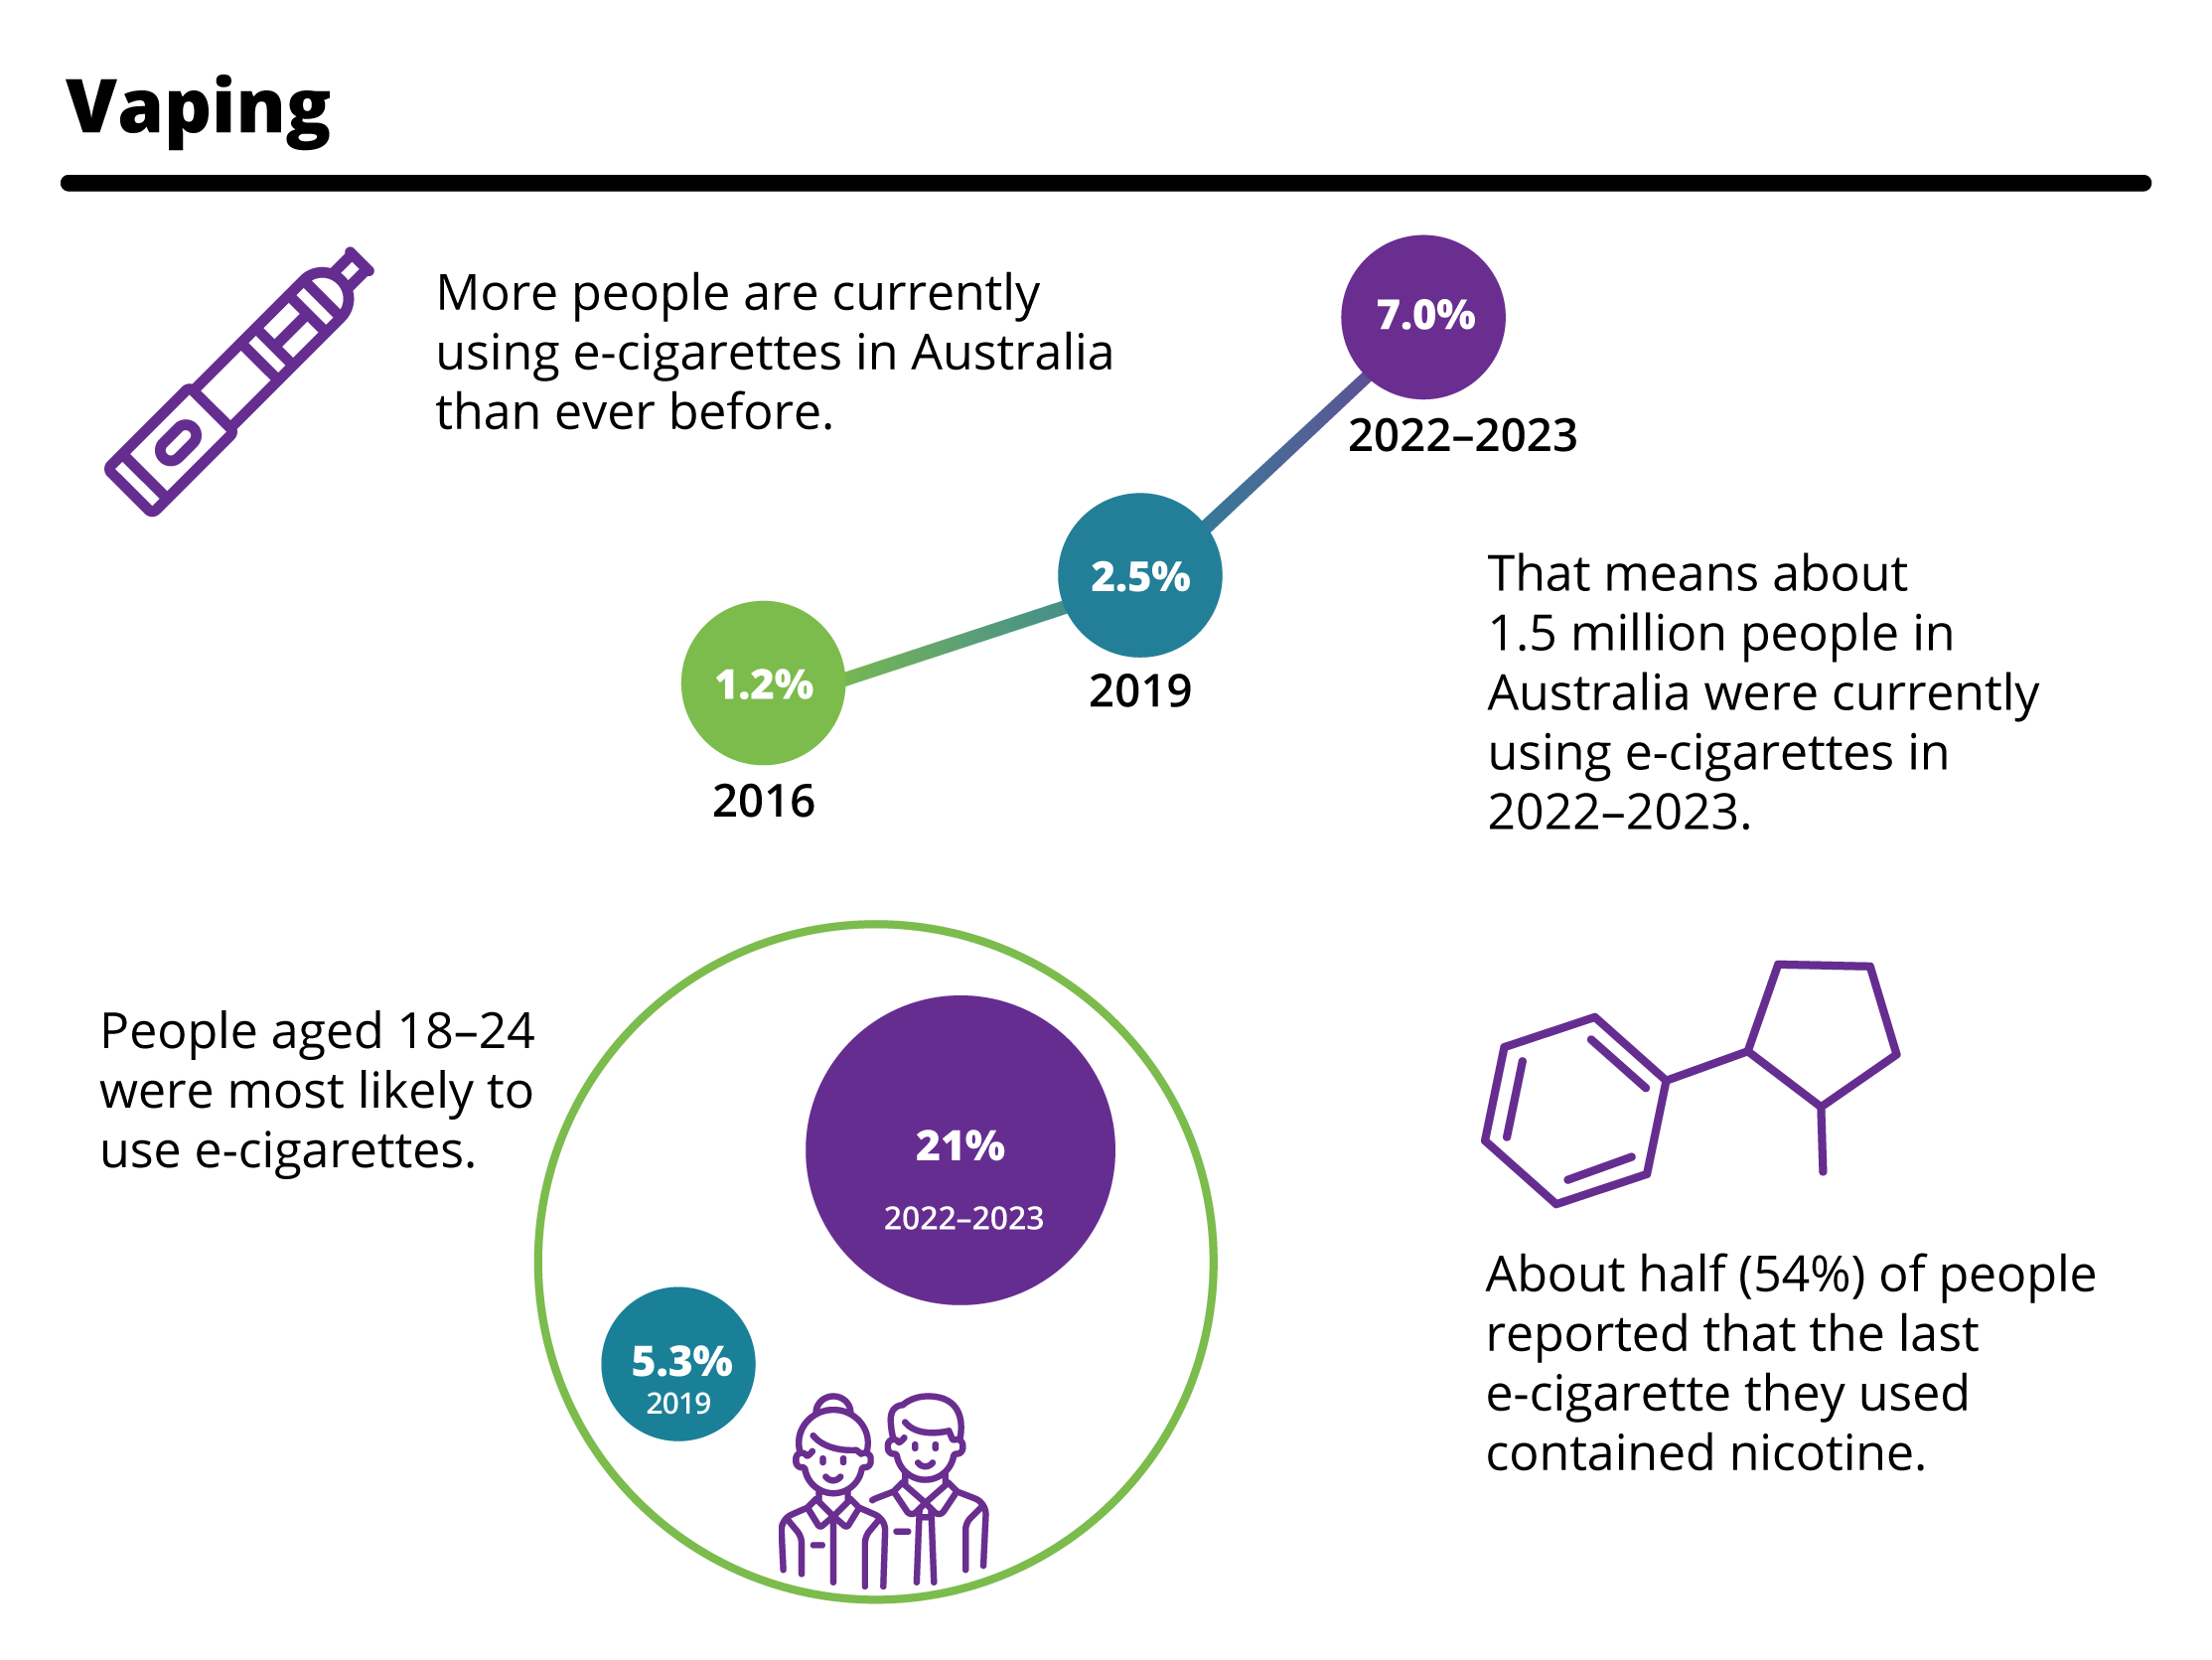 Infographic shows that current use of e-cigarettes in Australia is higher than ever before (7.0% of people aged 14 and over in 2022–2023), use is highest among people aged 18–24, and 54% of last used e-cigarettes contained nicotine.